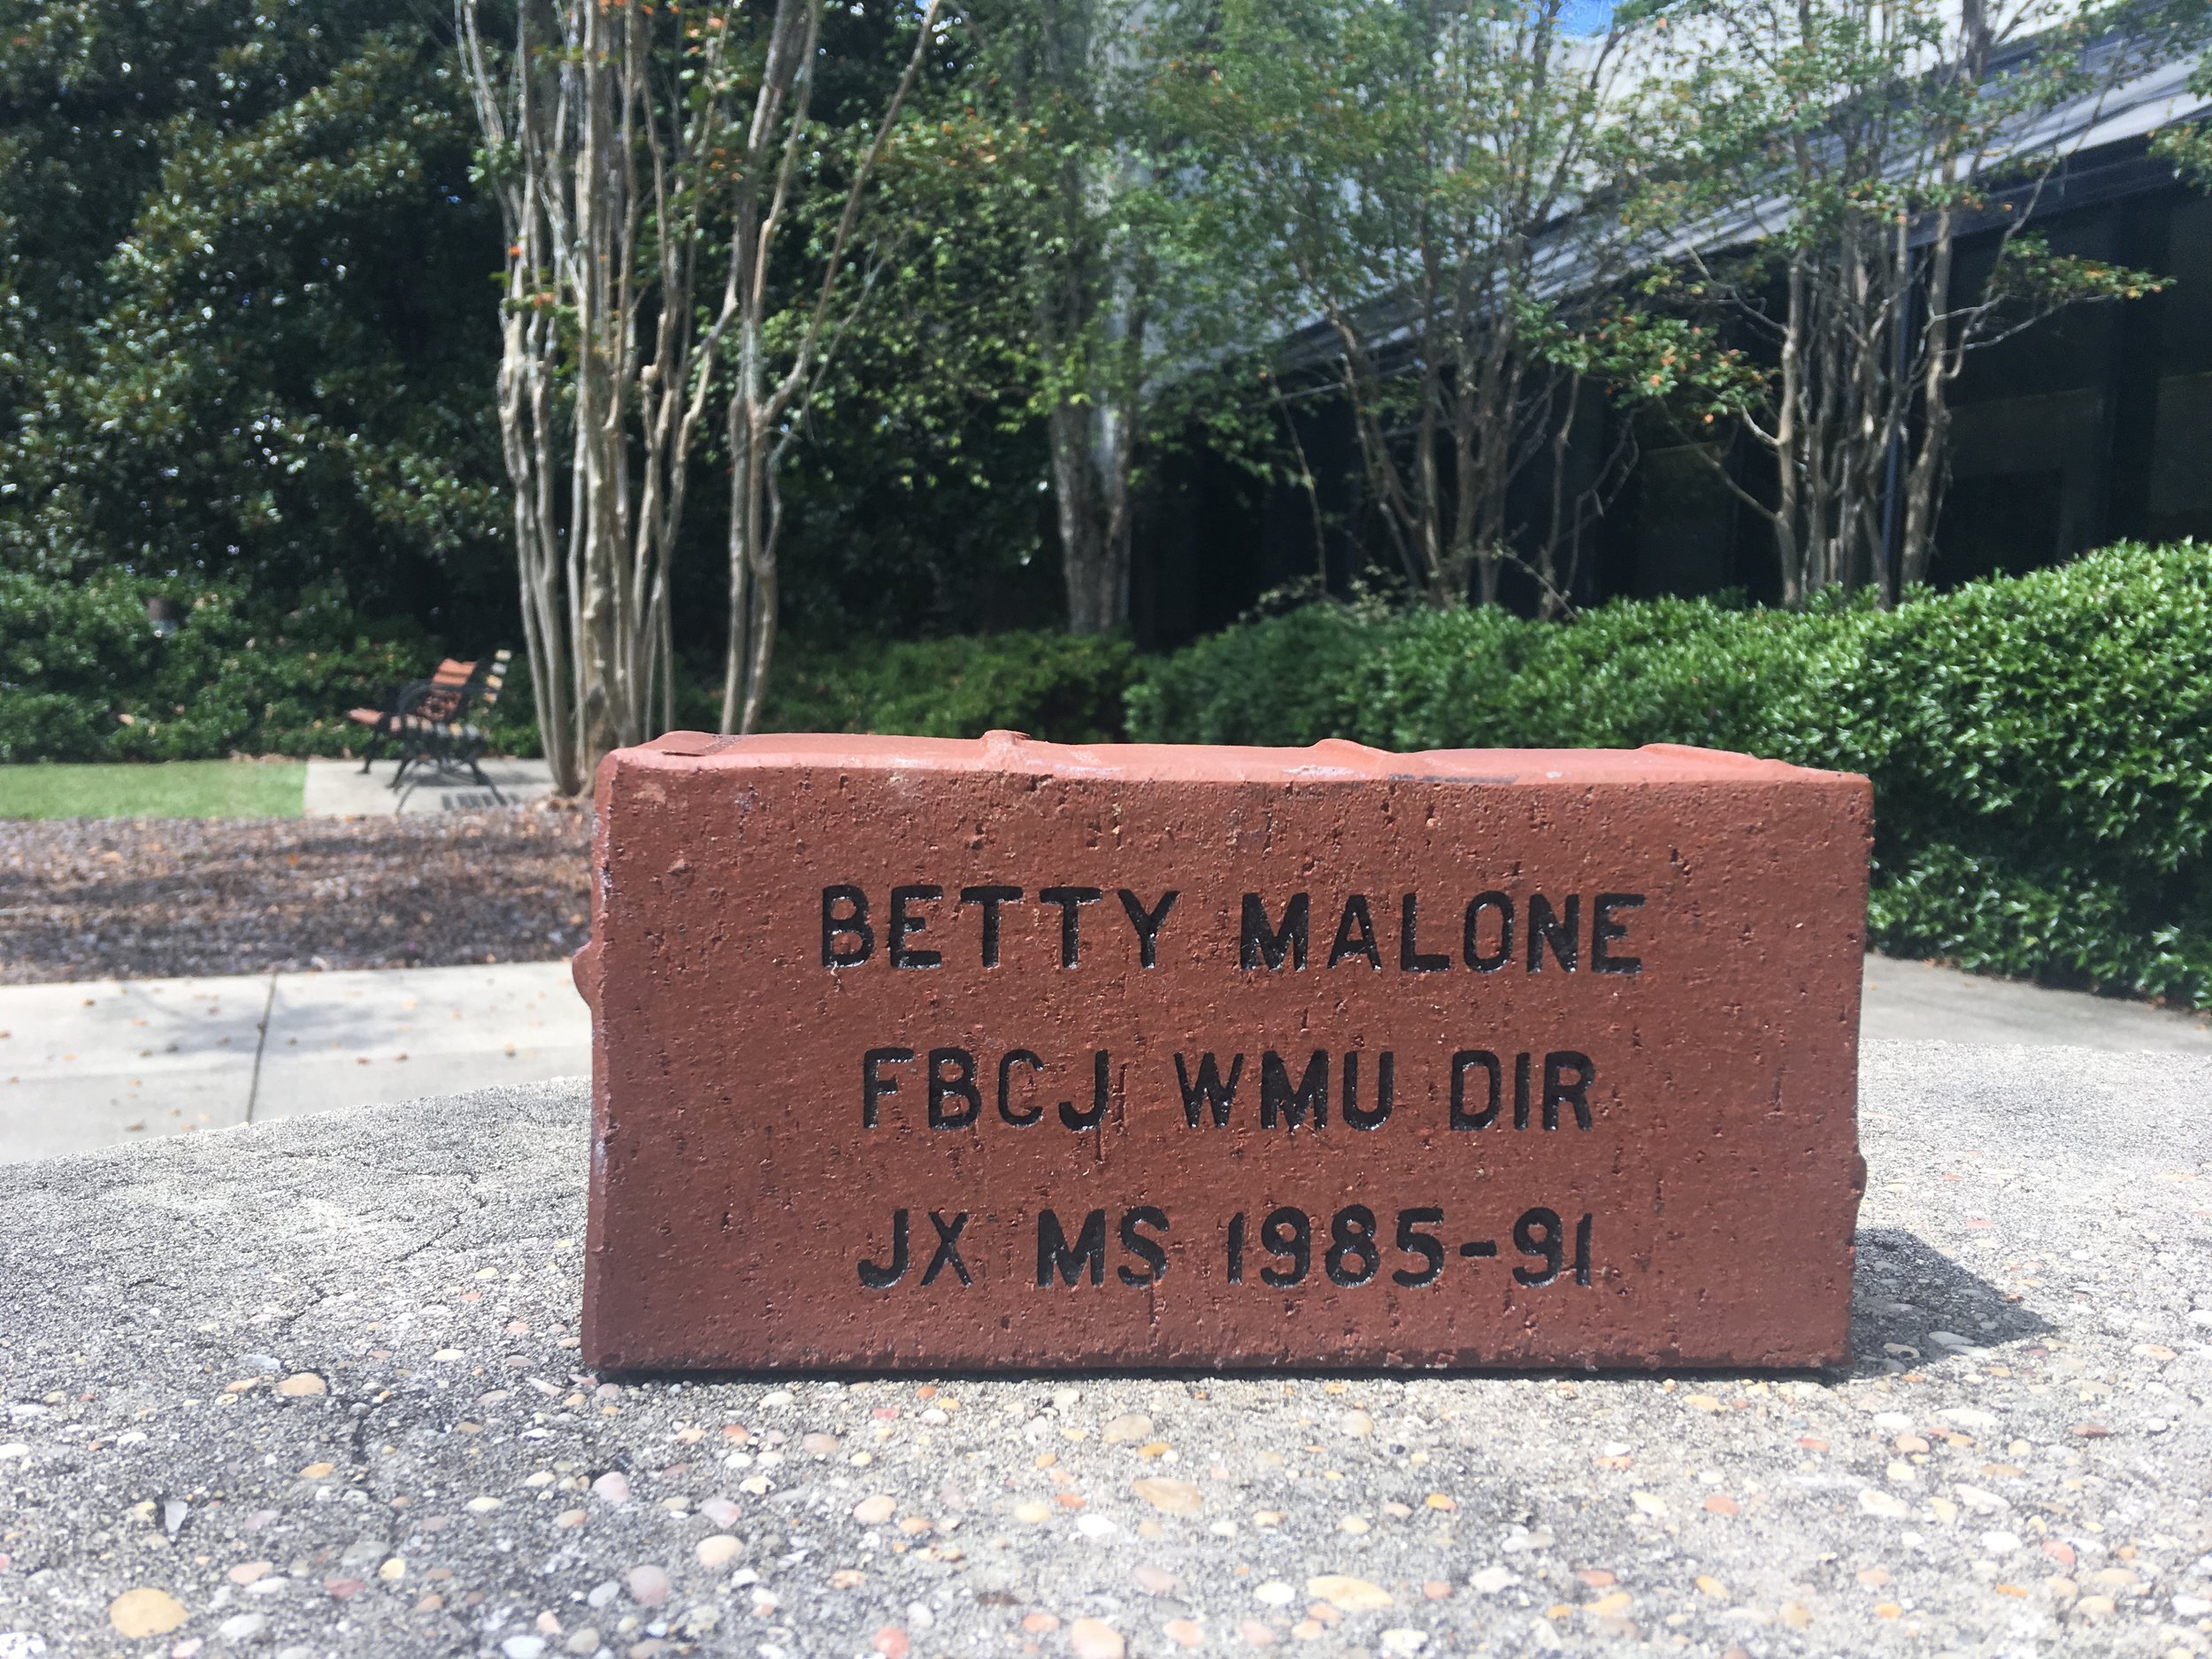 A brick was bought in memory of Betty Malone and her years of holding the missions banner.